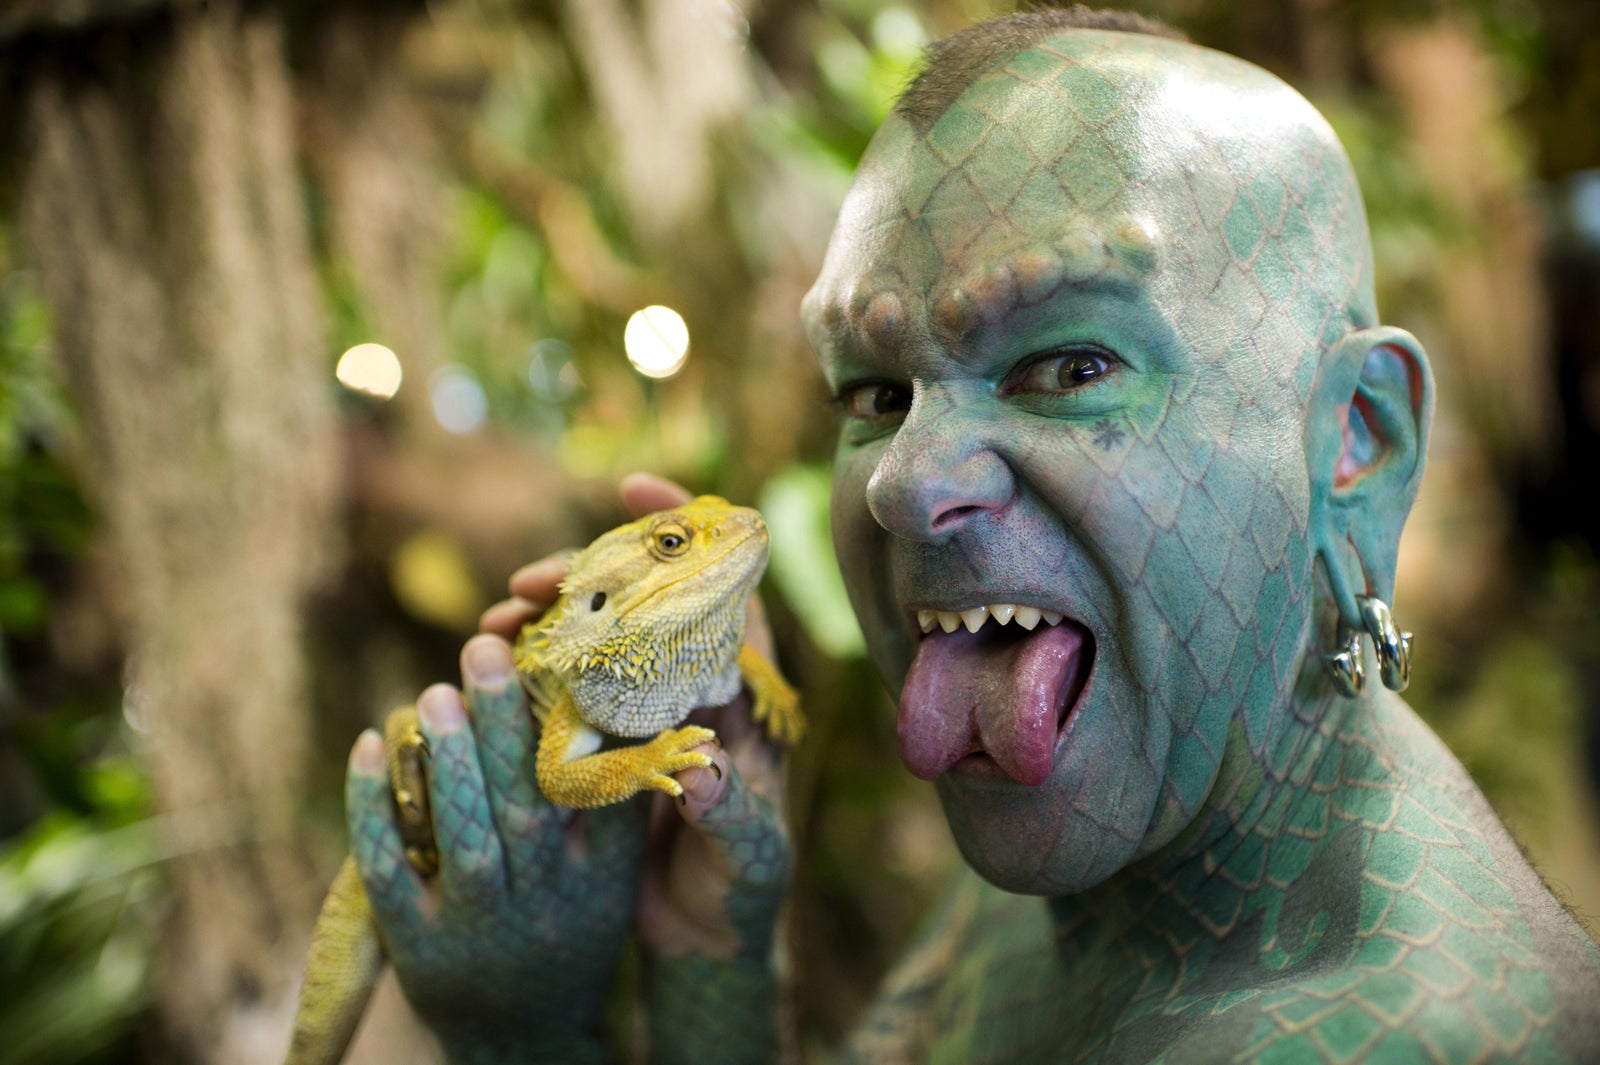 10. Eric Sprague, also known as "The Lizardman", has a full-body tattoo of green scales and has had his teeth filed into sharp points. - wide 5